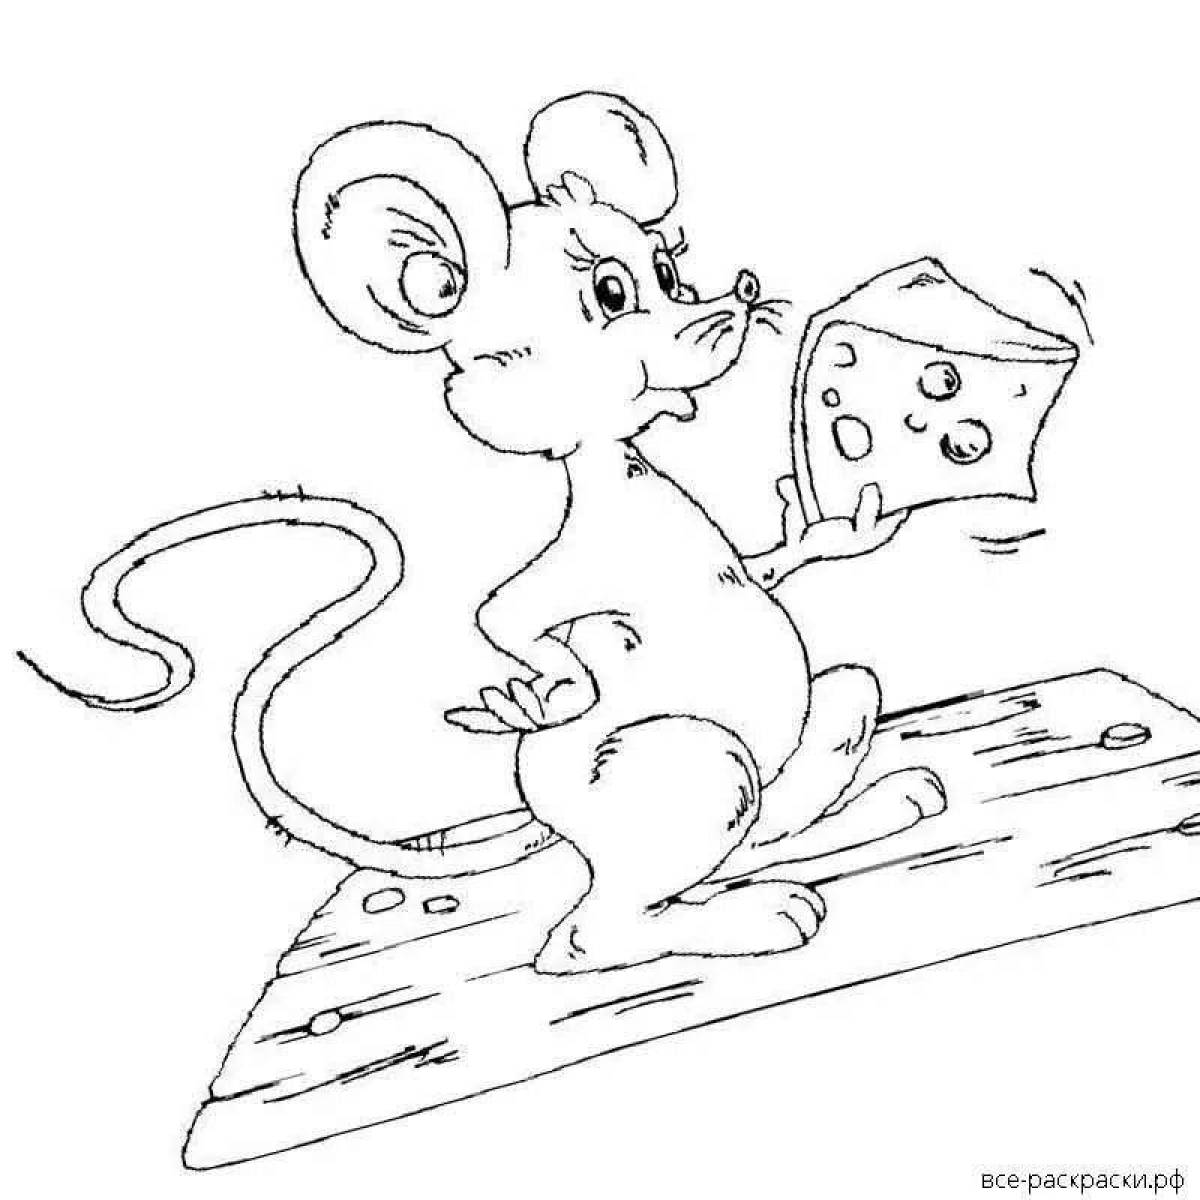 Glamorous coloring tale of the silly mouse